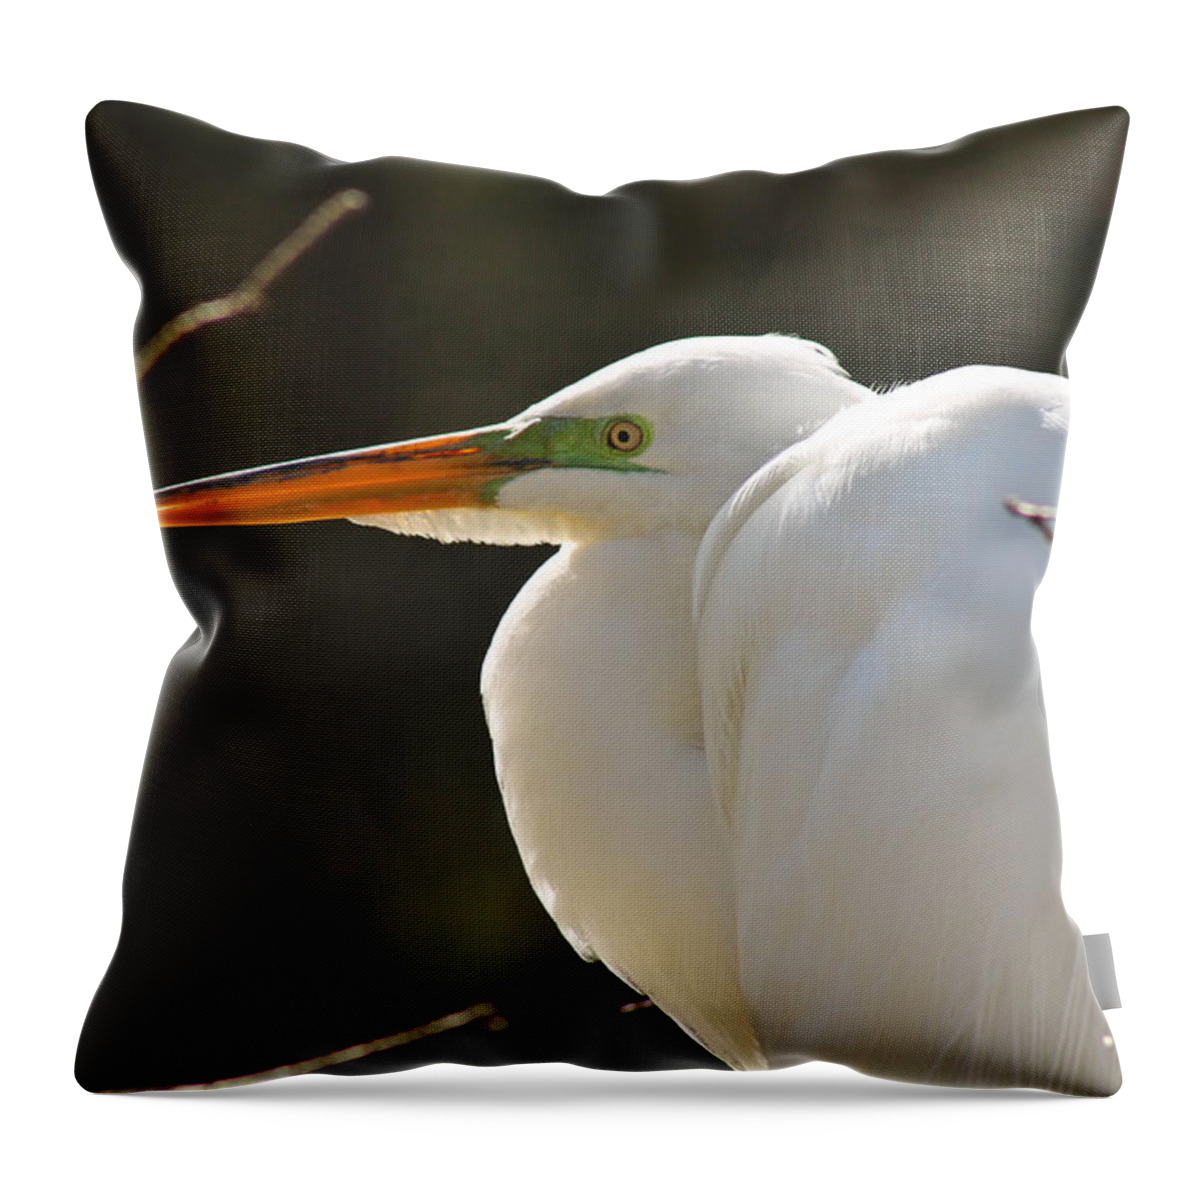 Egret Throw Pillow featuring the photograph Watching by Jessica Brown